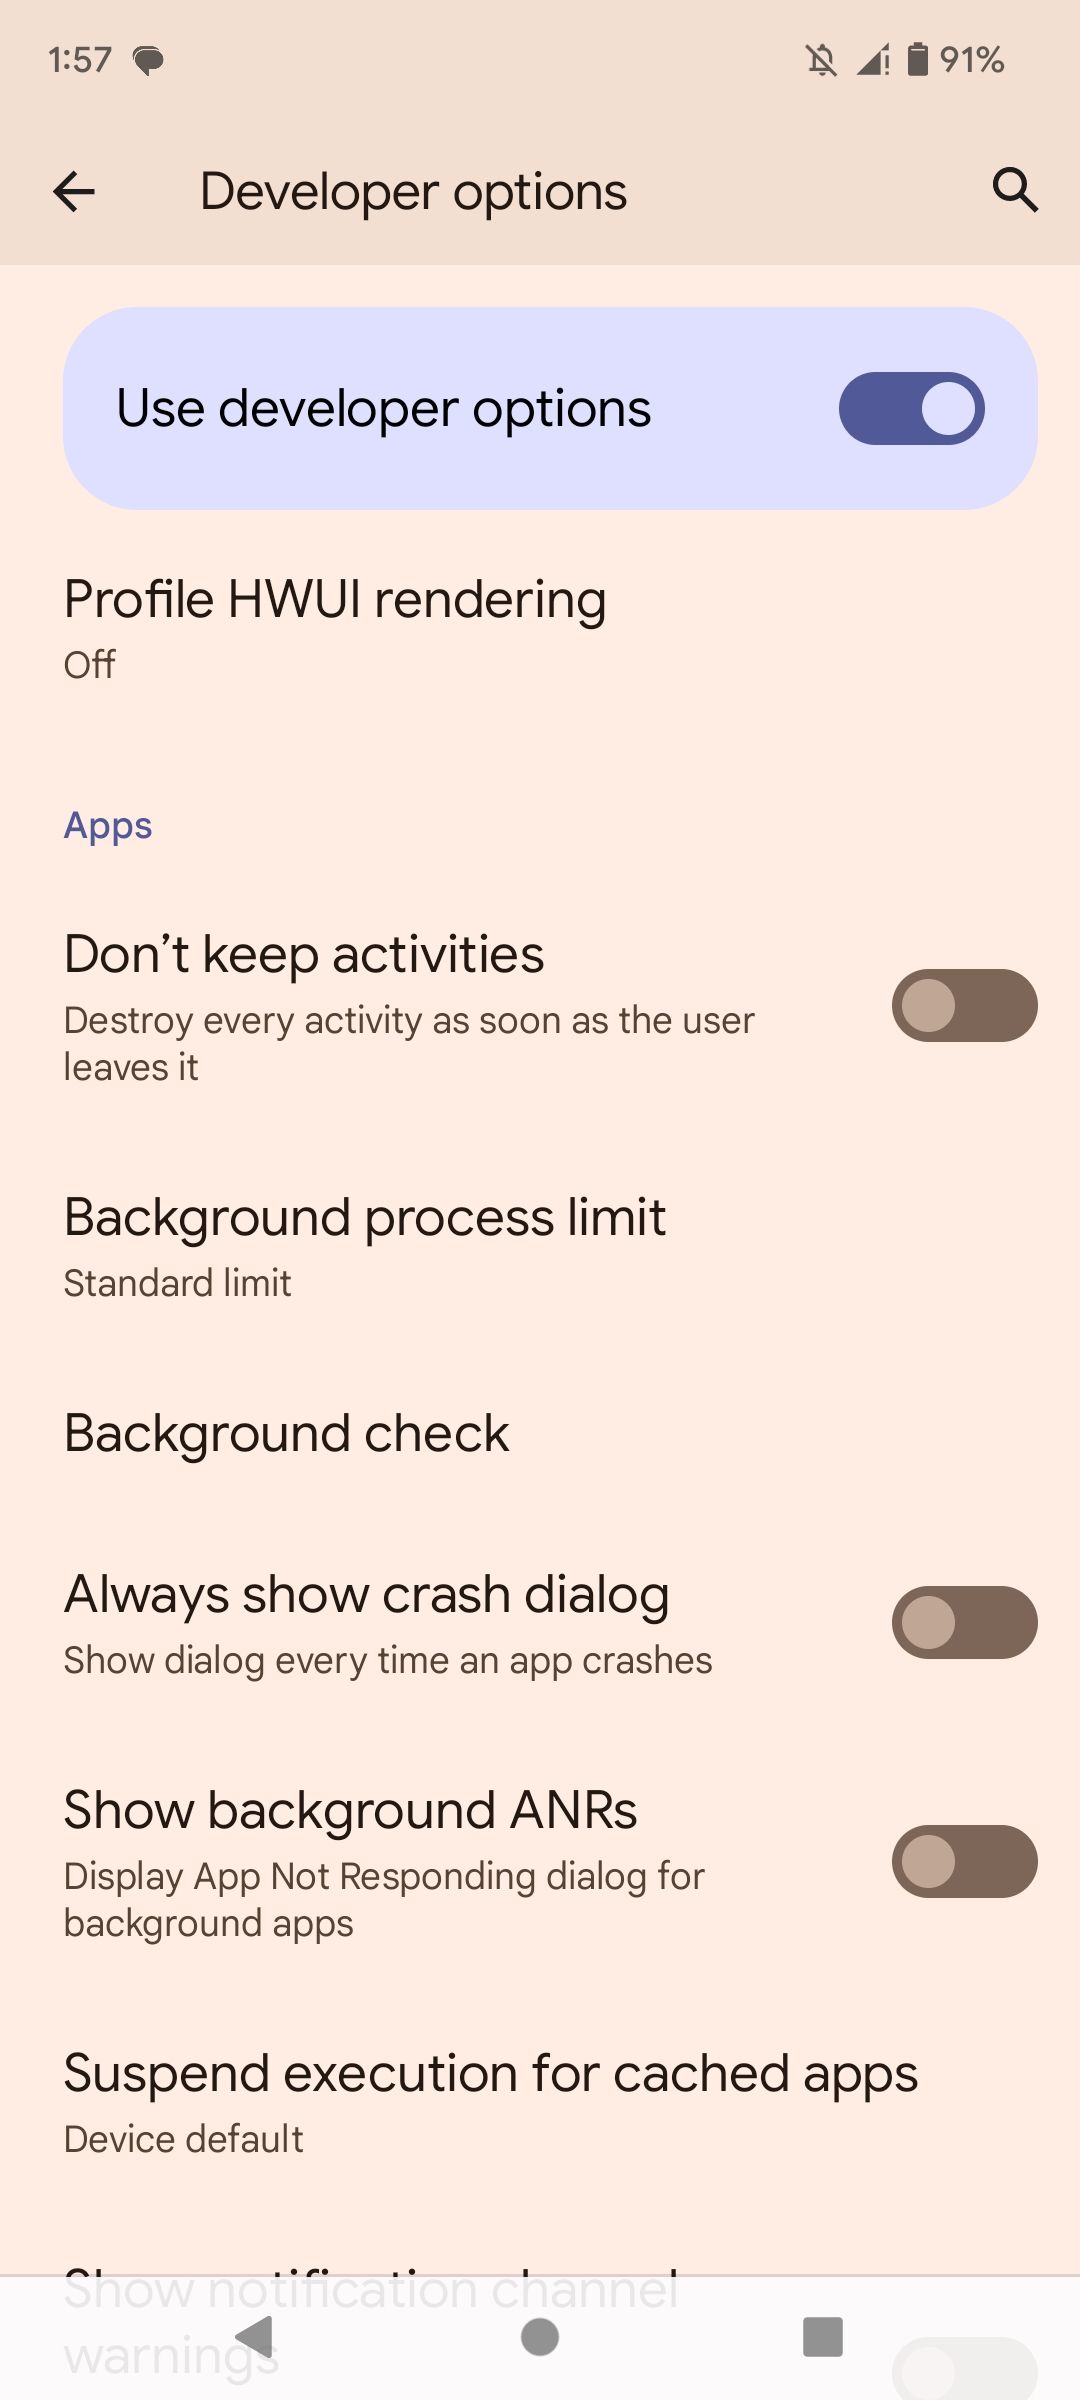 App settings section in Android Developer options